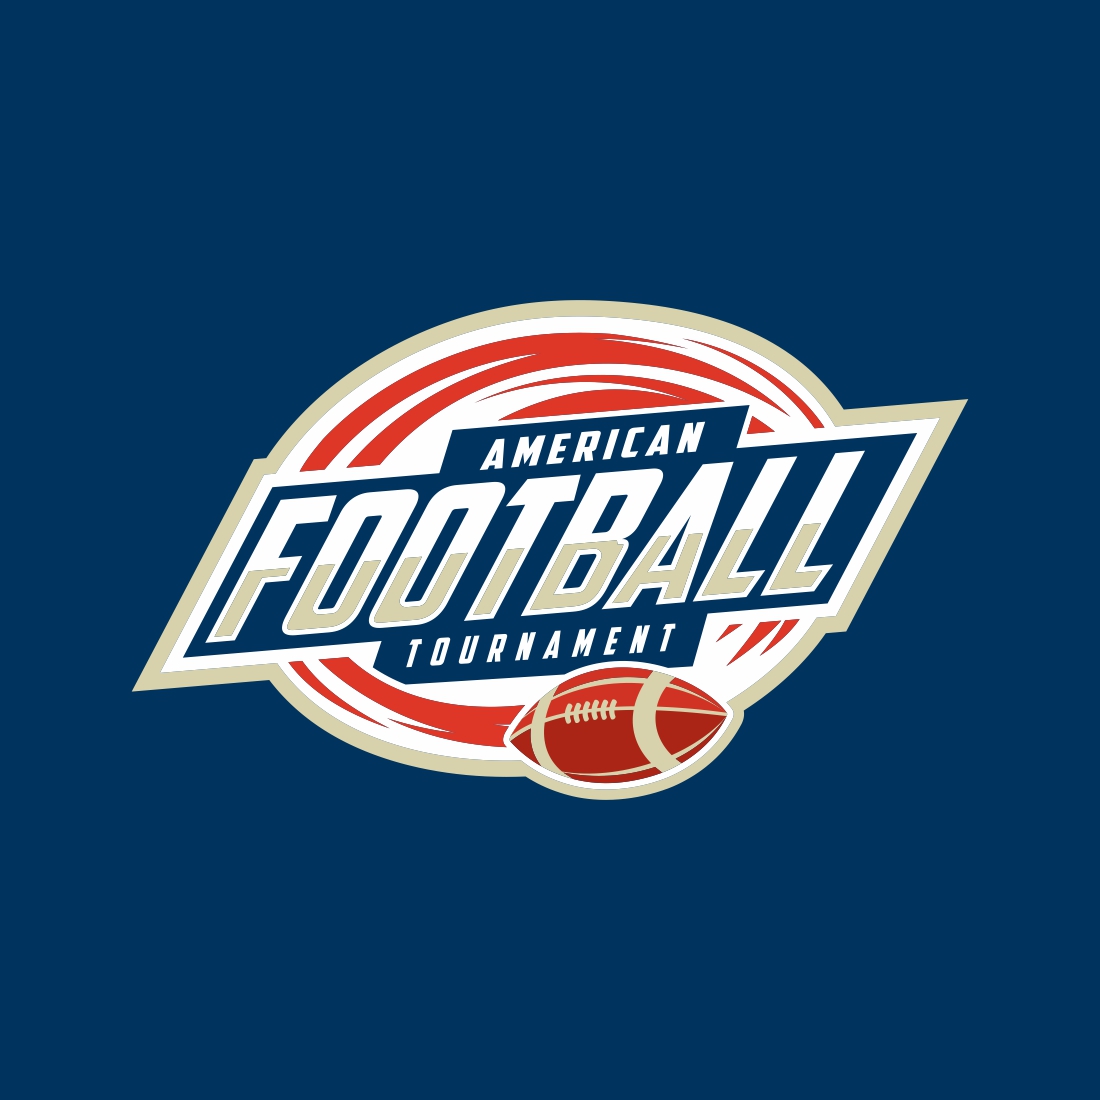 American Football Sports logo and badge – Only $7 preview image.